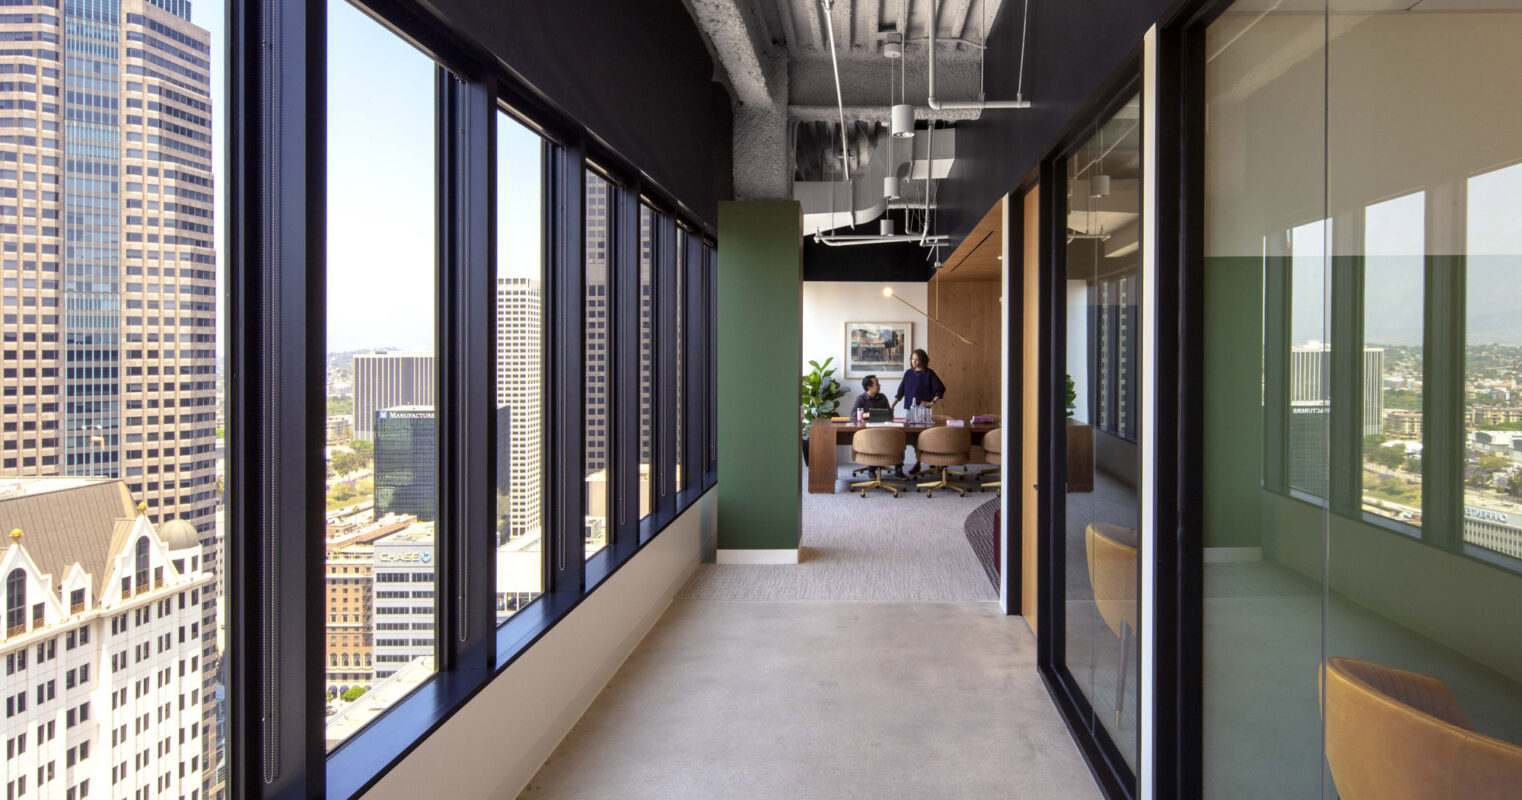 Modern office space boasting floor-to-ceiling windows that invite abundant natural light, framing city views with an open-concept work area and exposed ceiling ductwork, highlighting an industrial design aesthetic.